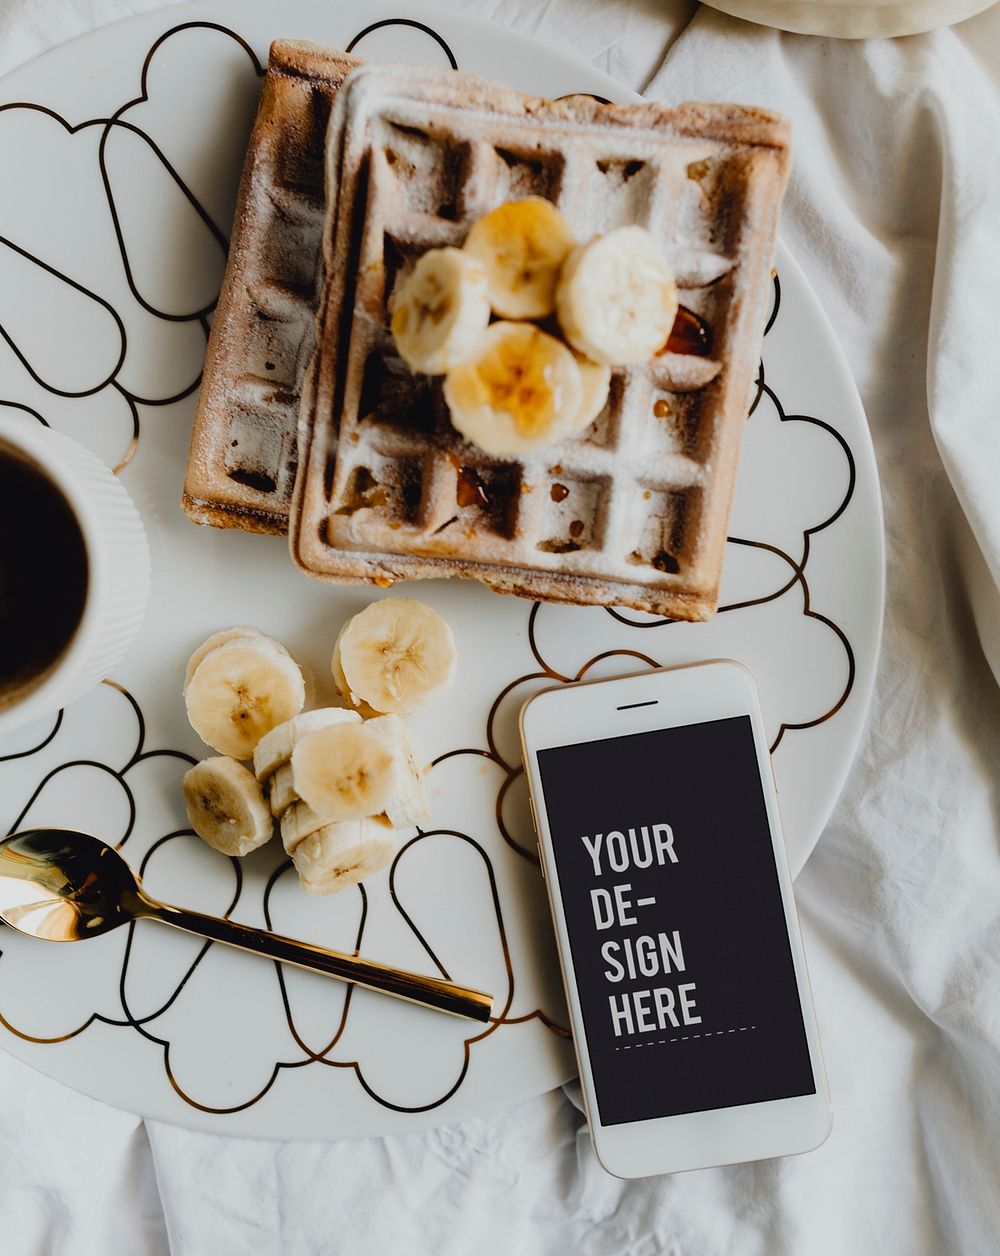 Plate of waffle with slices of banana and a cup of coffee next to a smartphone